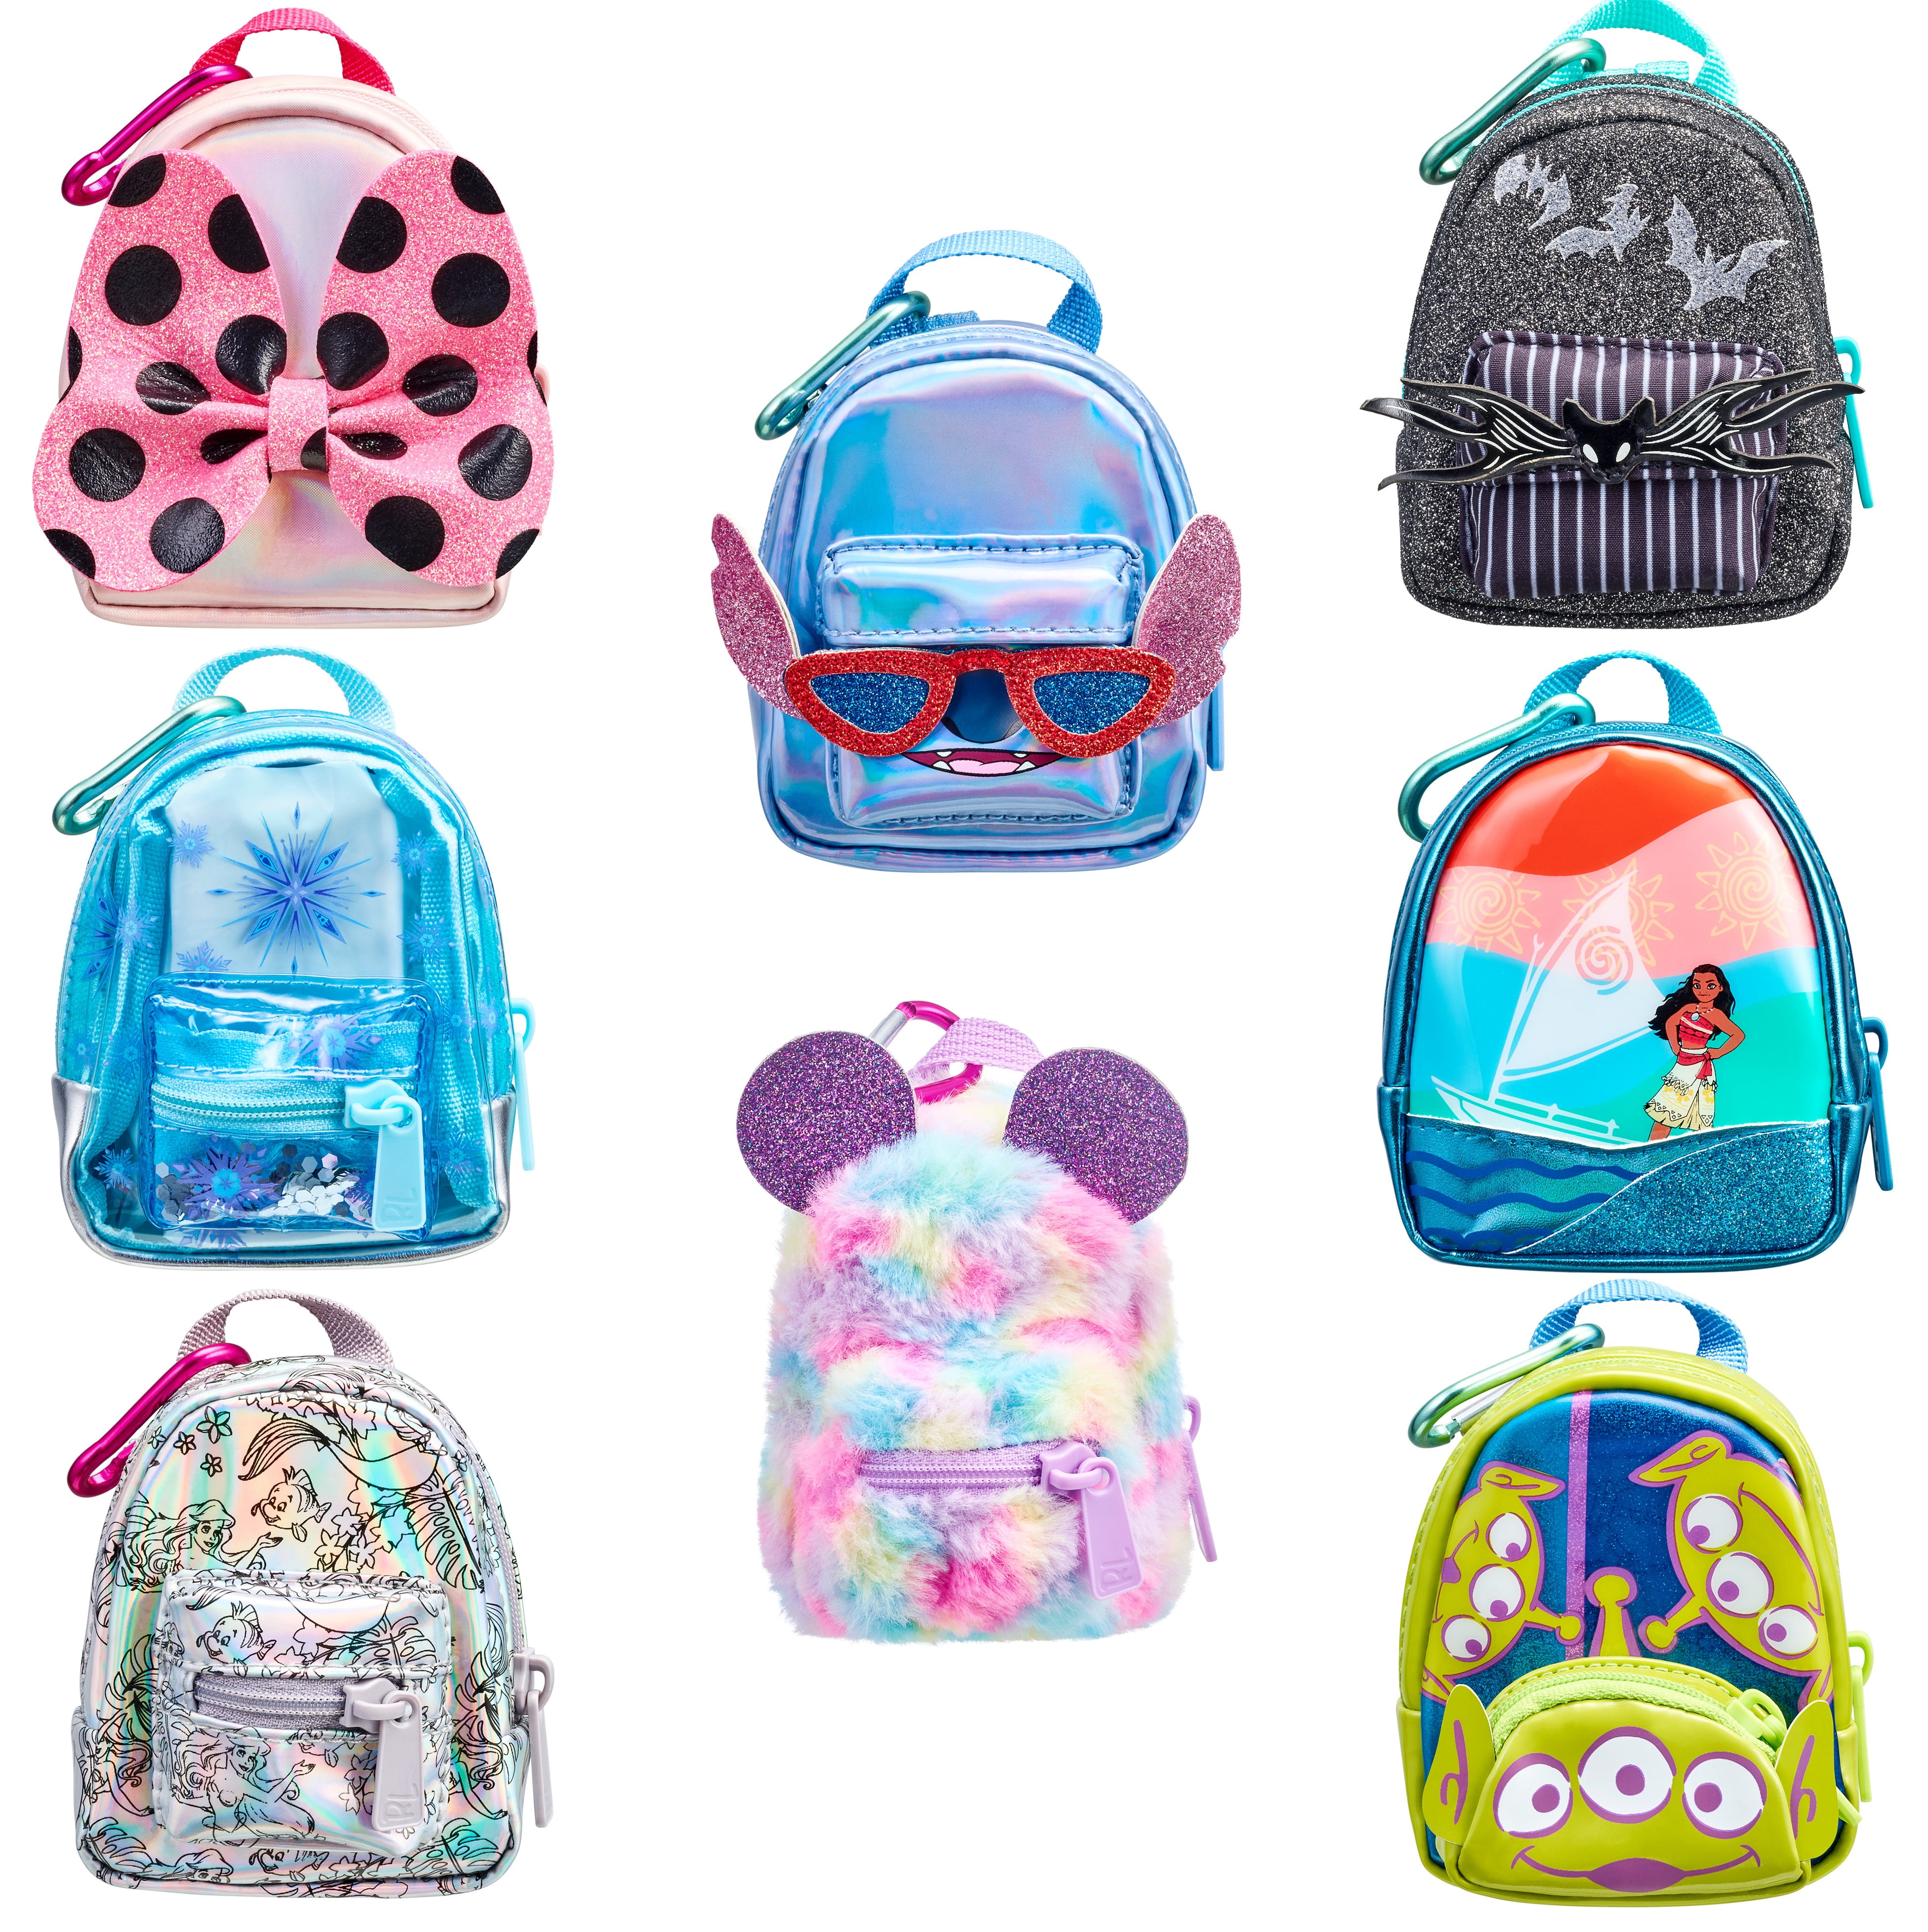 Real Littles Mini Backpack With Surprise School Supplies 4 MINI BACKPACKS 